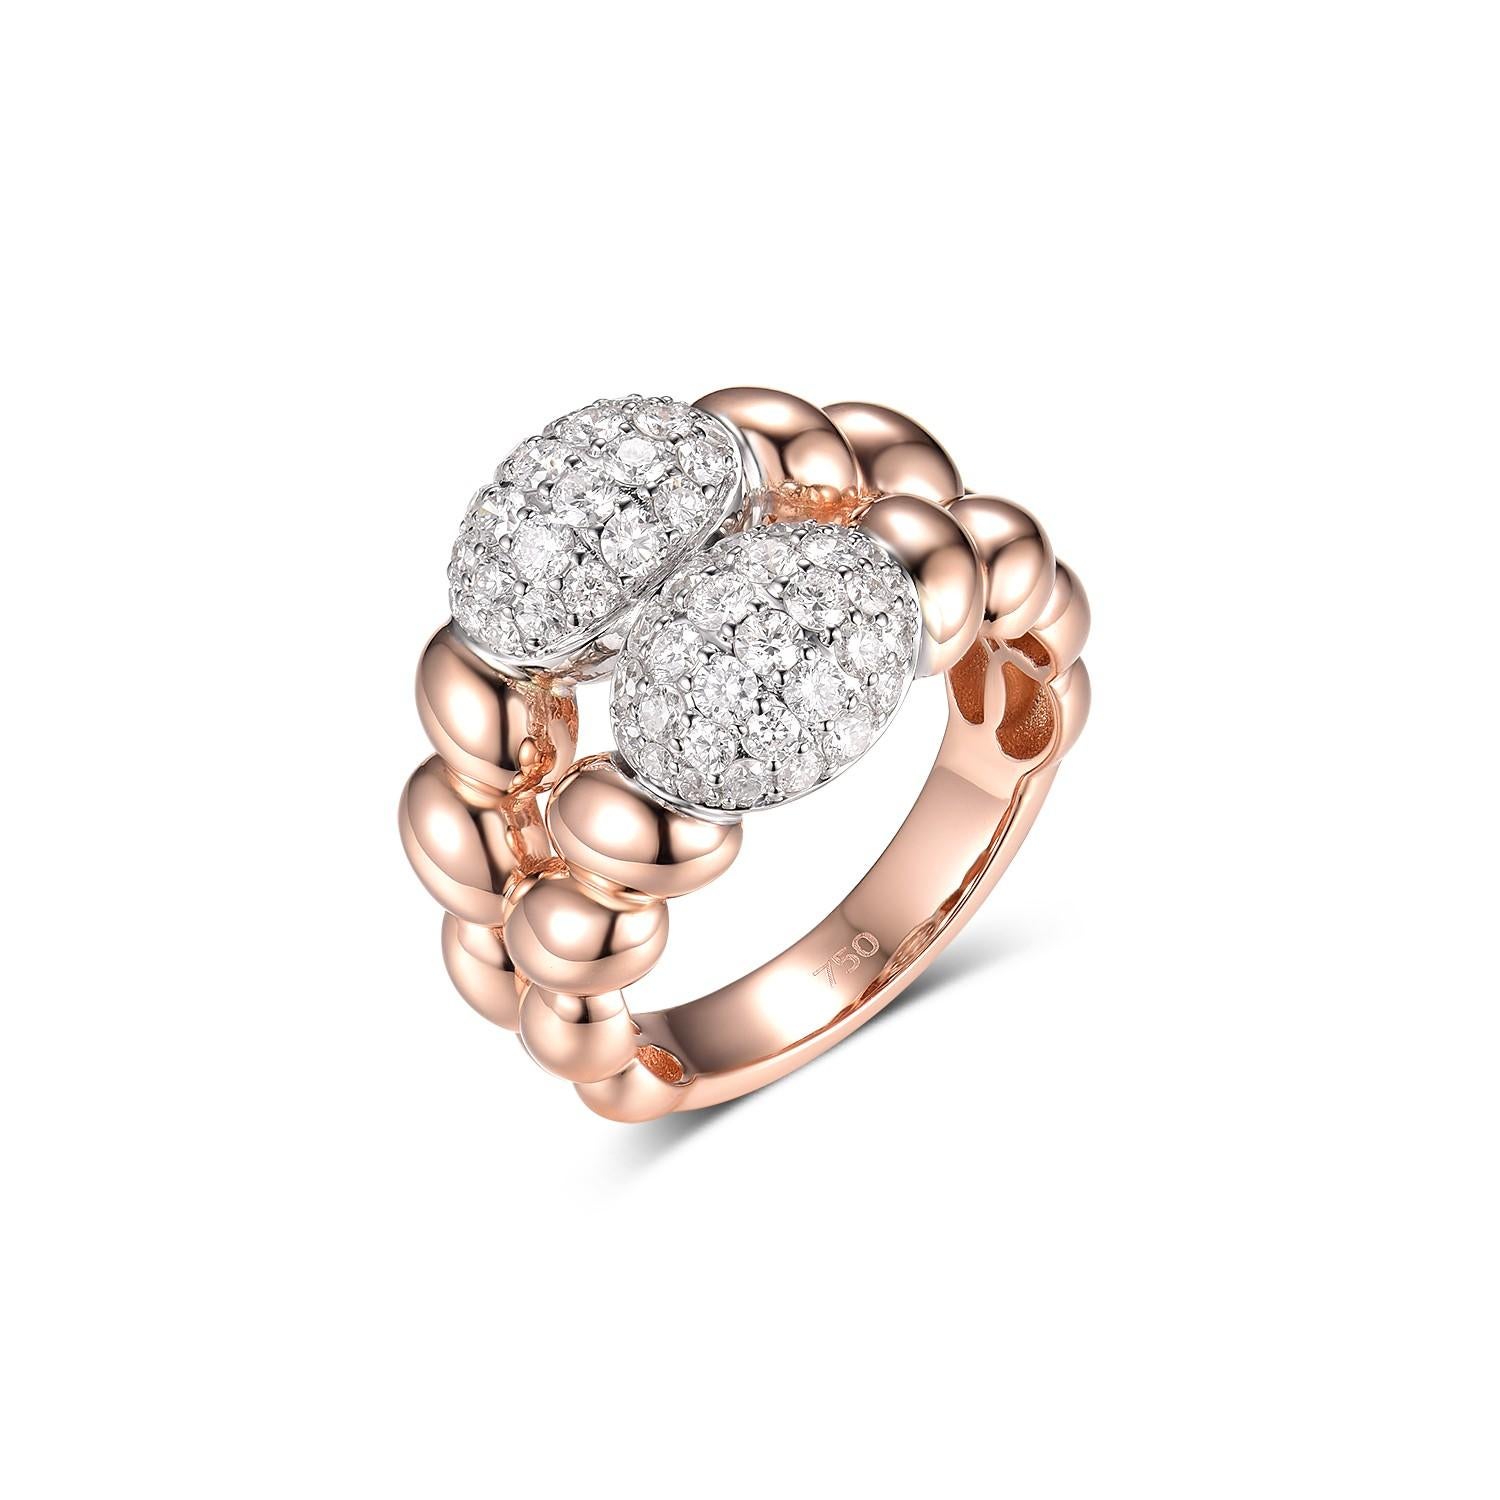 This ring is an exquisite piece that combines the romantic allure of 18K rose gold with the pure brilliance of white gold and diamonds. The diamonds, weighing a total of 0.65 carats, are likely to be finely set in white gold to enhance their